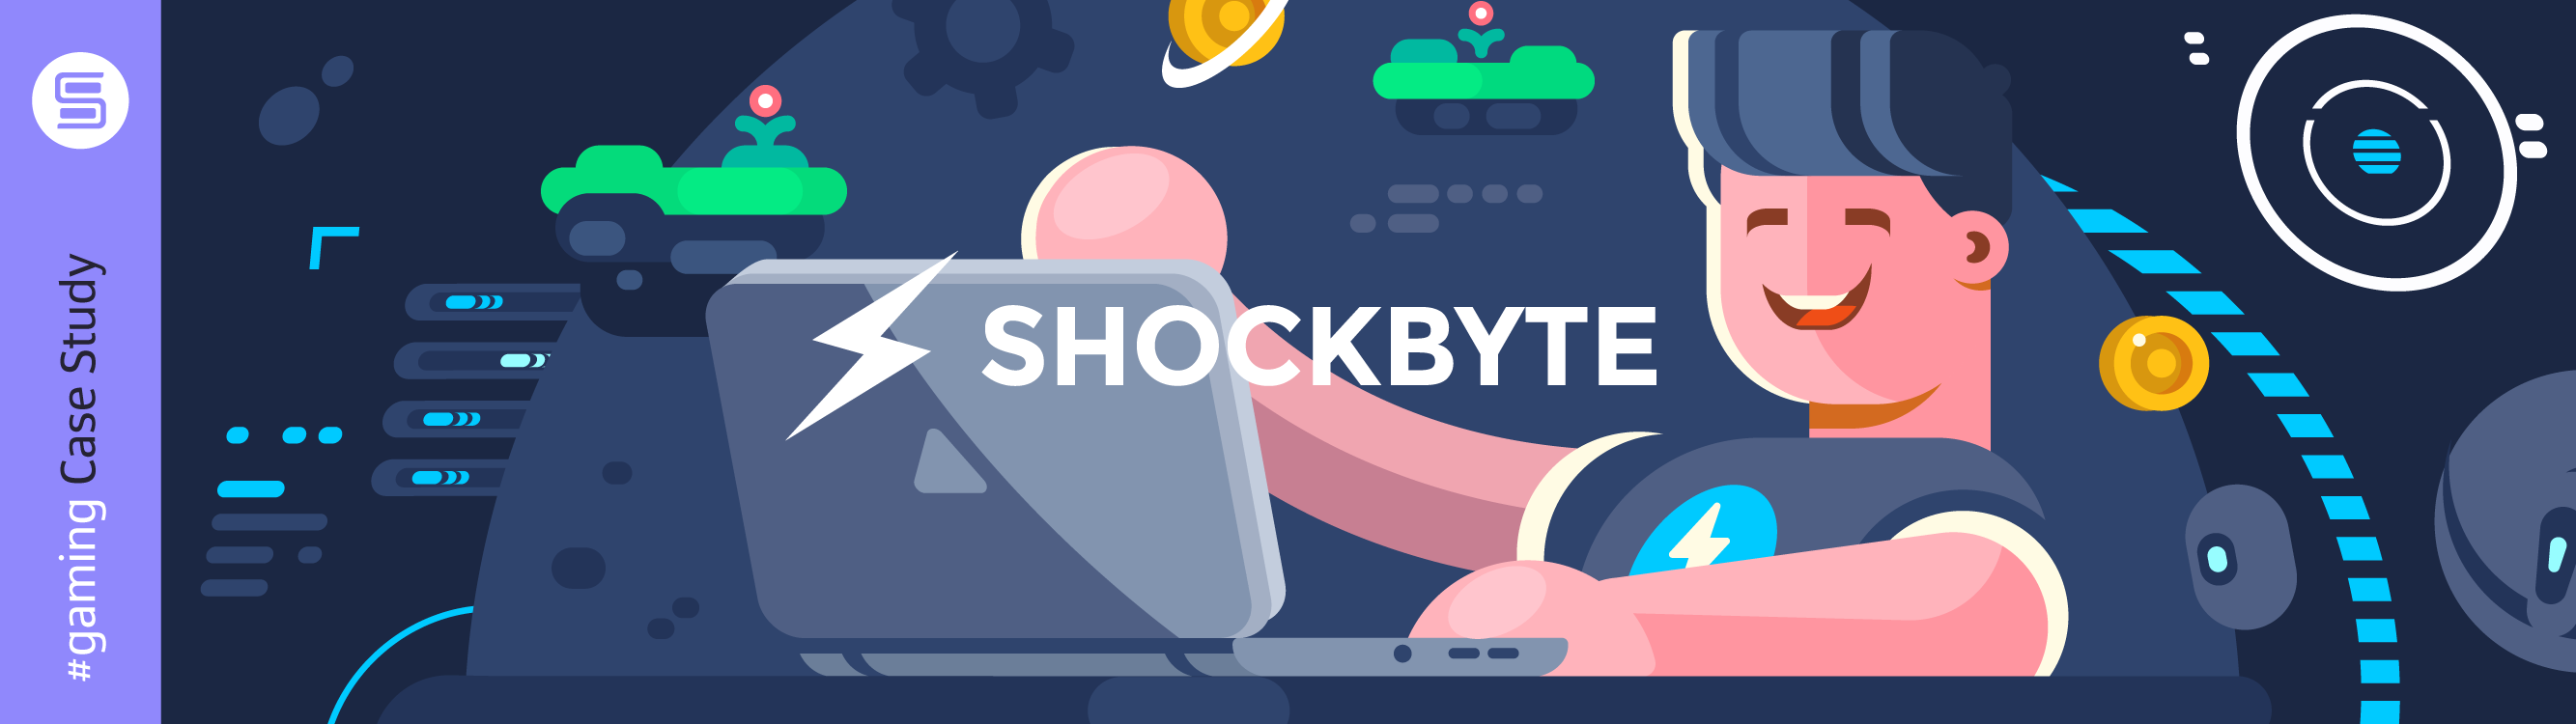 Helping Shockbyte empower gaming communities with uninterrupted play